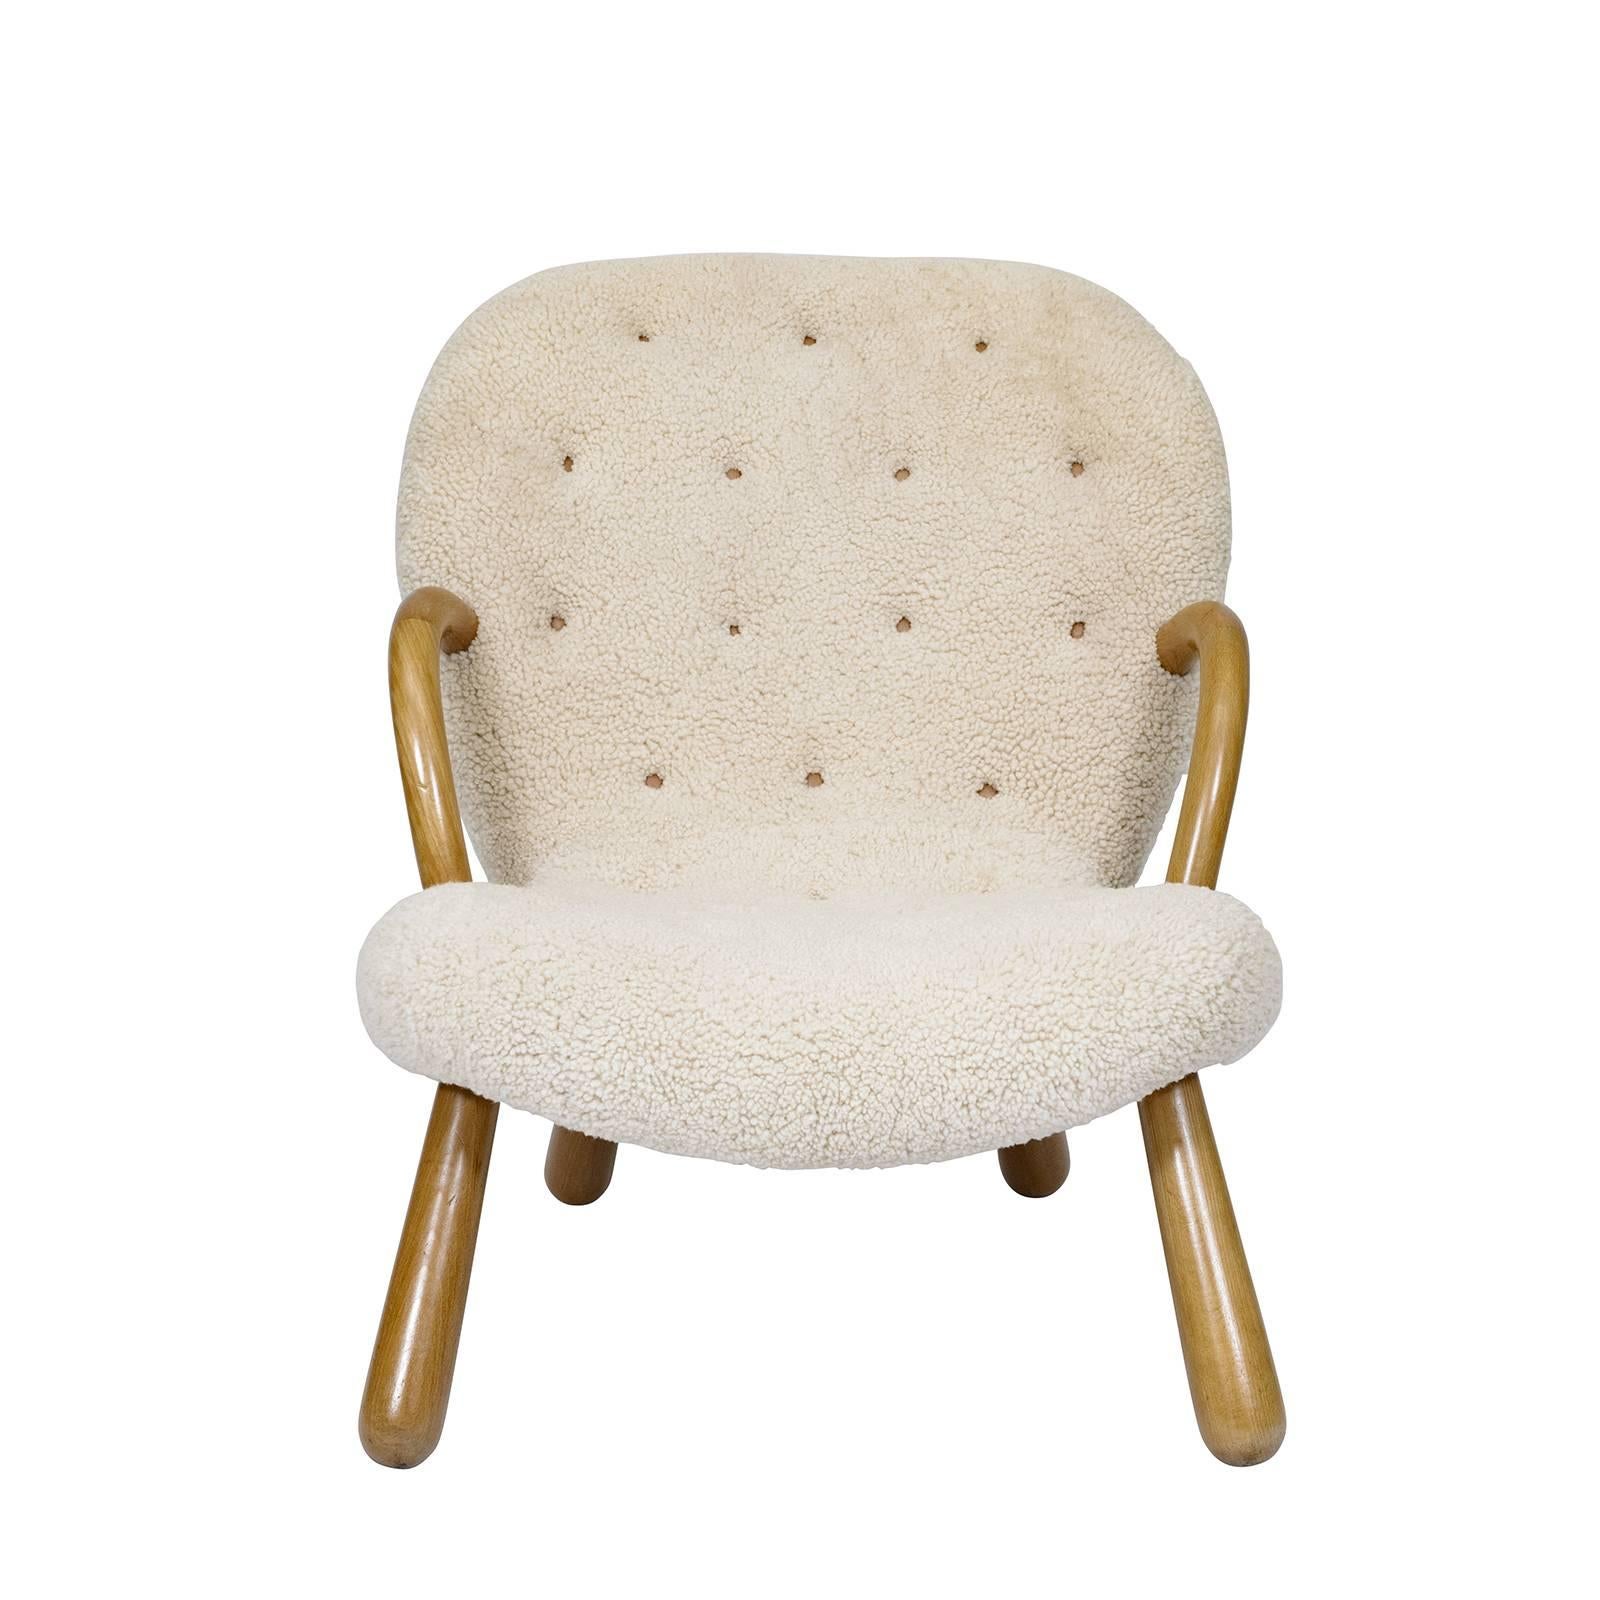 Philip Arctander "Clam" chair upholstered in sheepskin.   Store formerly known as ARTFUL DODGER INC